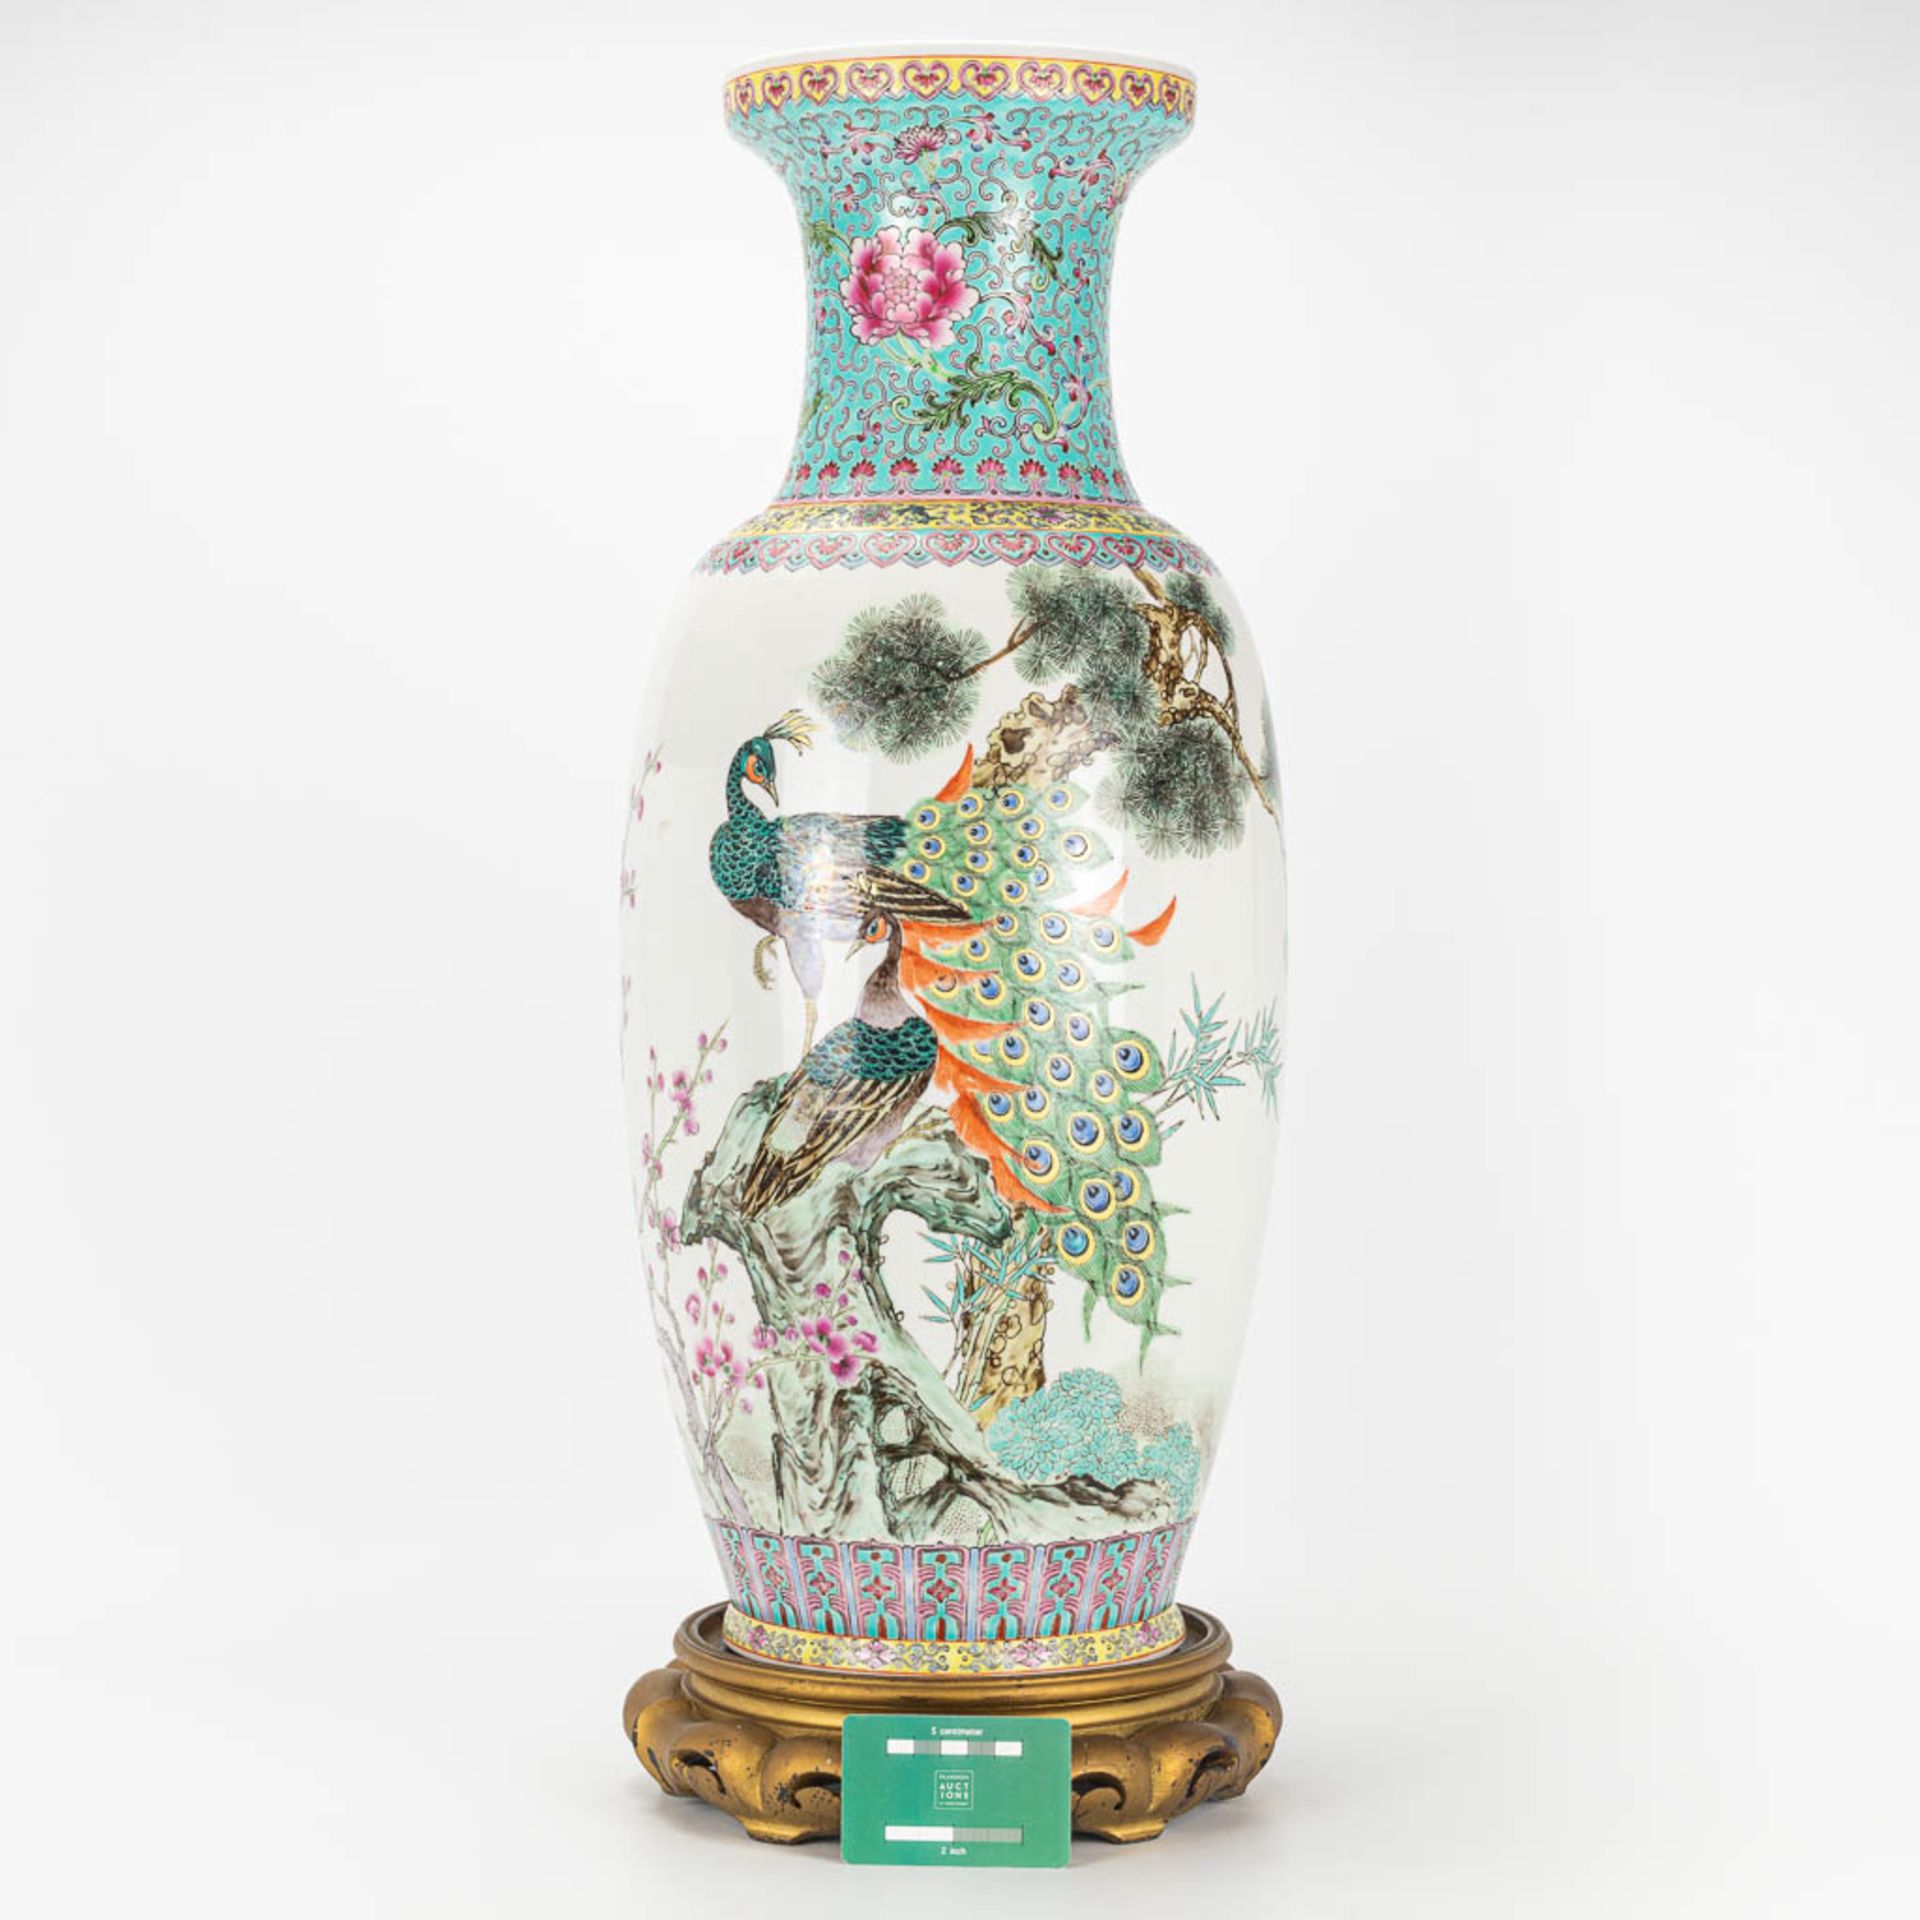 A vase made of Chinese porcelain and decorated with peacocks - Image 12 of 16